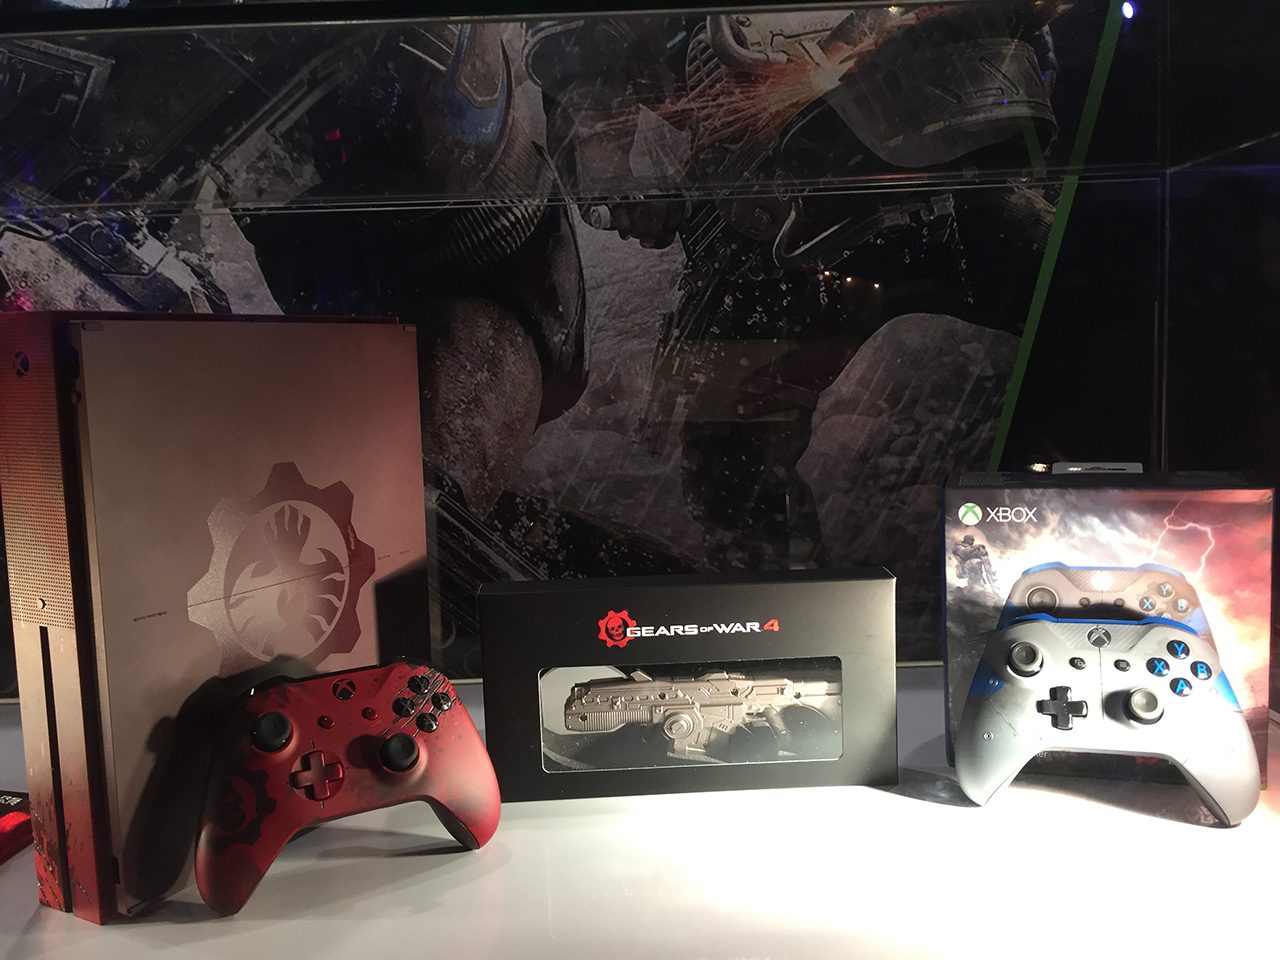 GEARS OF WAR 4. A limited edition Gears of War Xbox package showcased at GameStart. Photo by Don Kevin Hapal/Rappler 